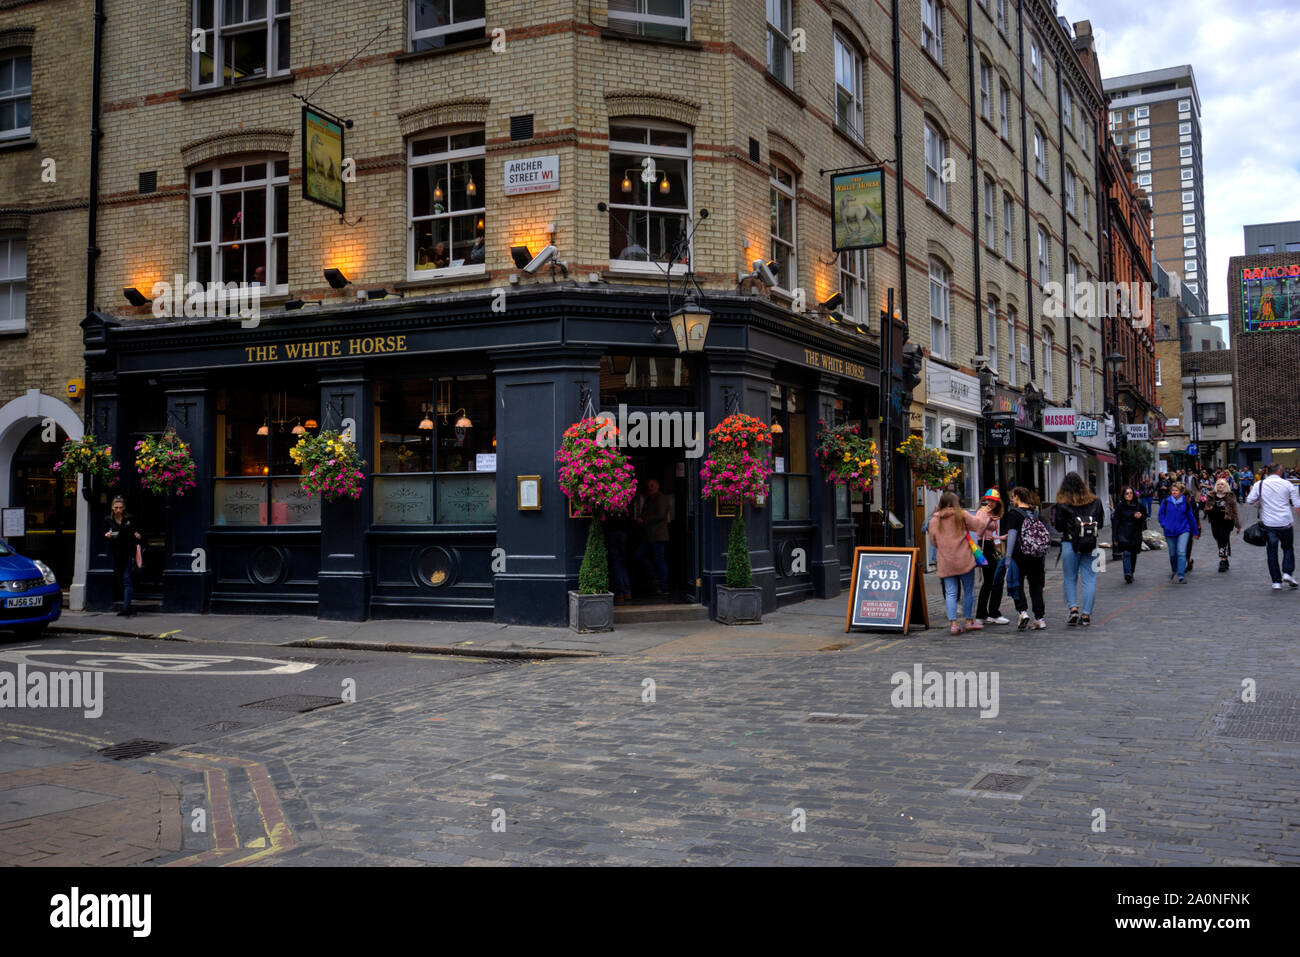 London, United Kingdom - September 7, 2019: The White Horse public house with many people outside some motion blurred and patrons inside Stock Photo